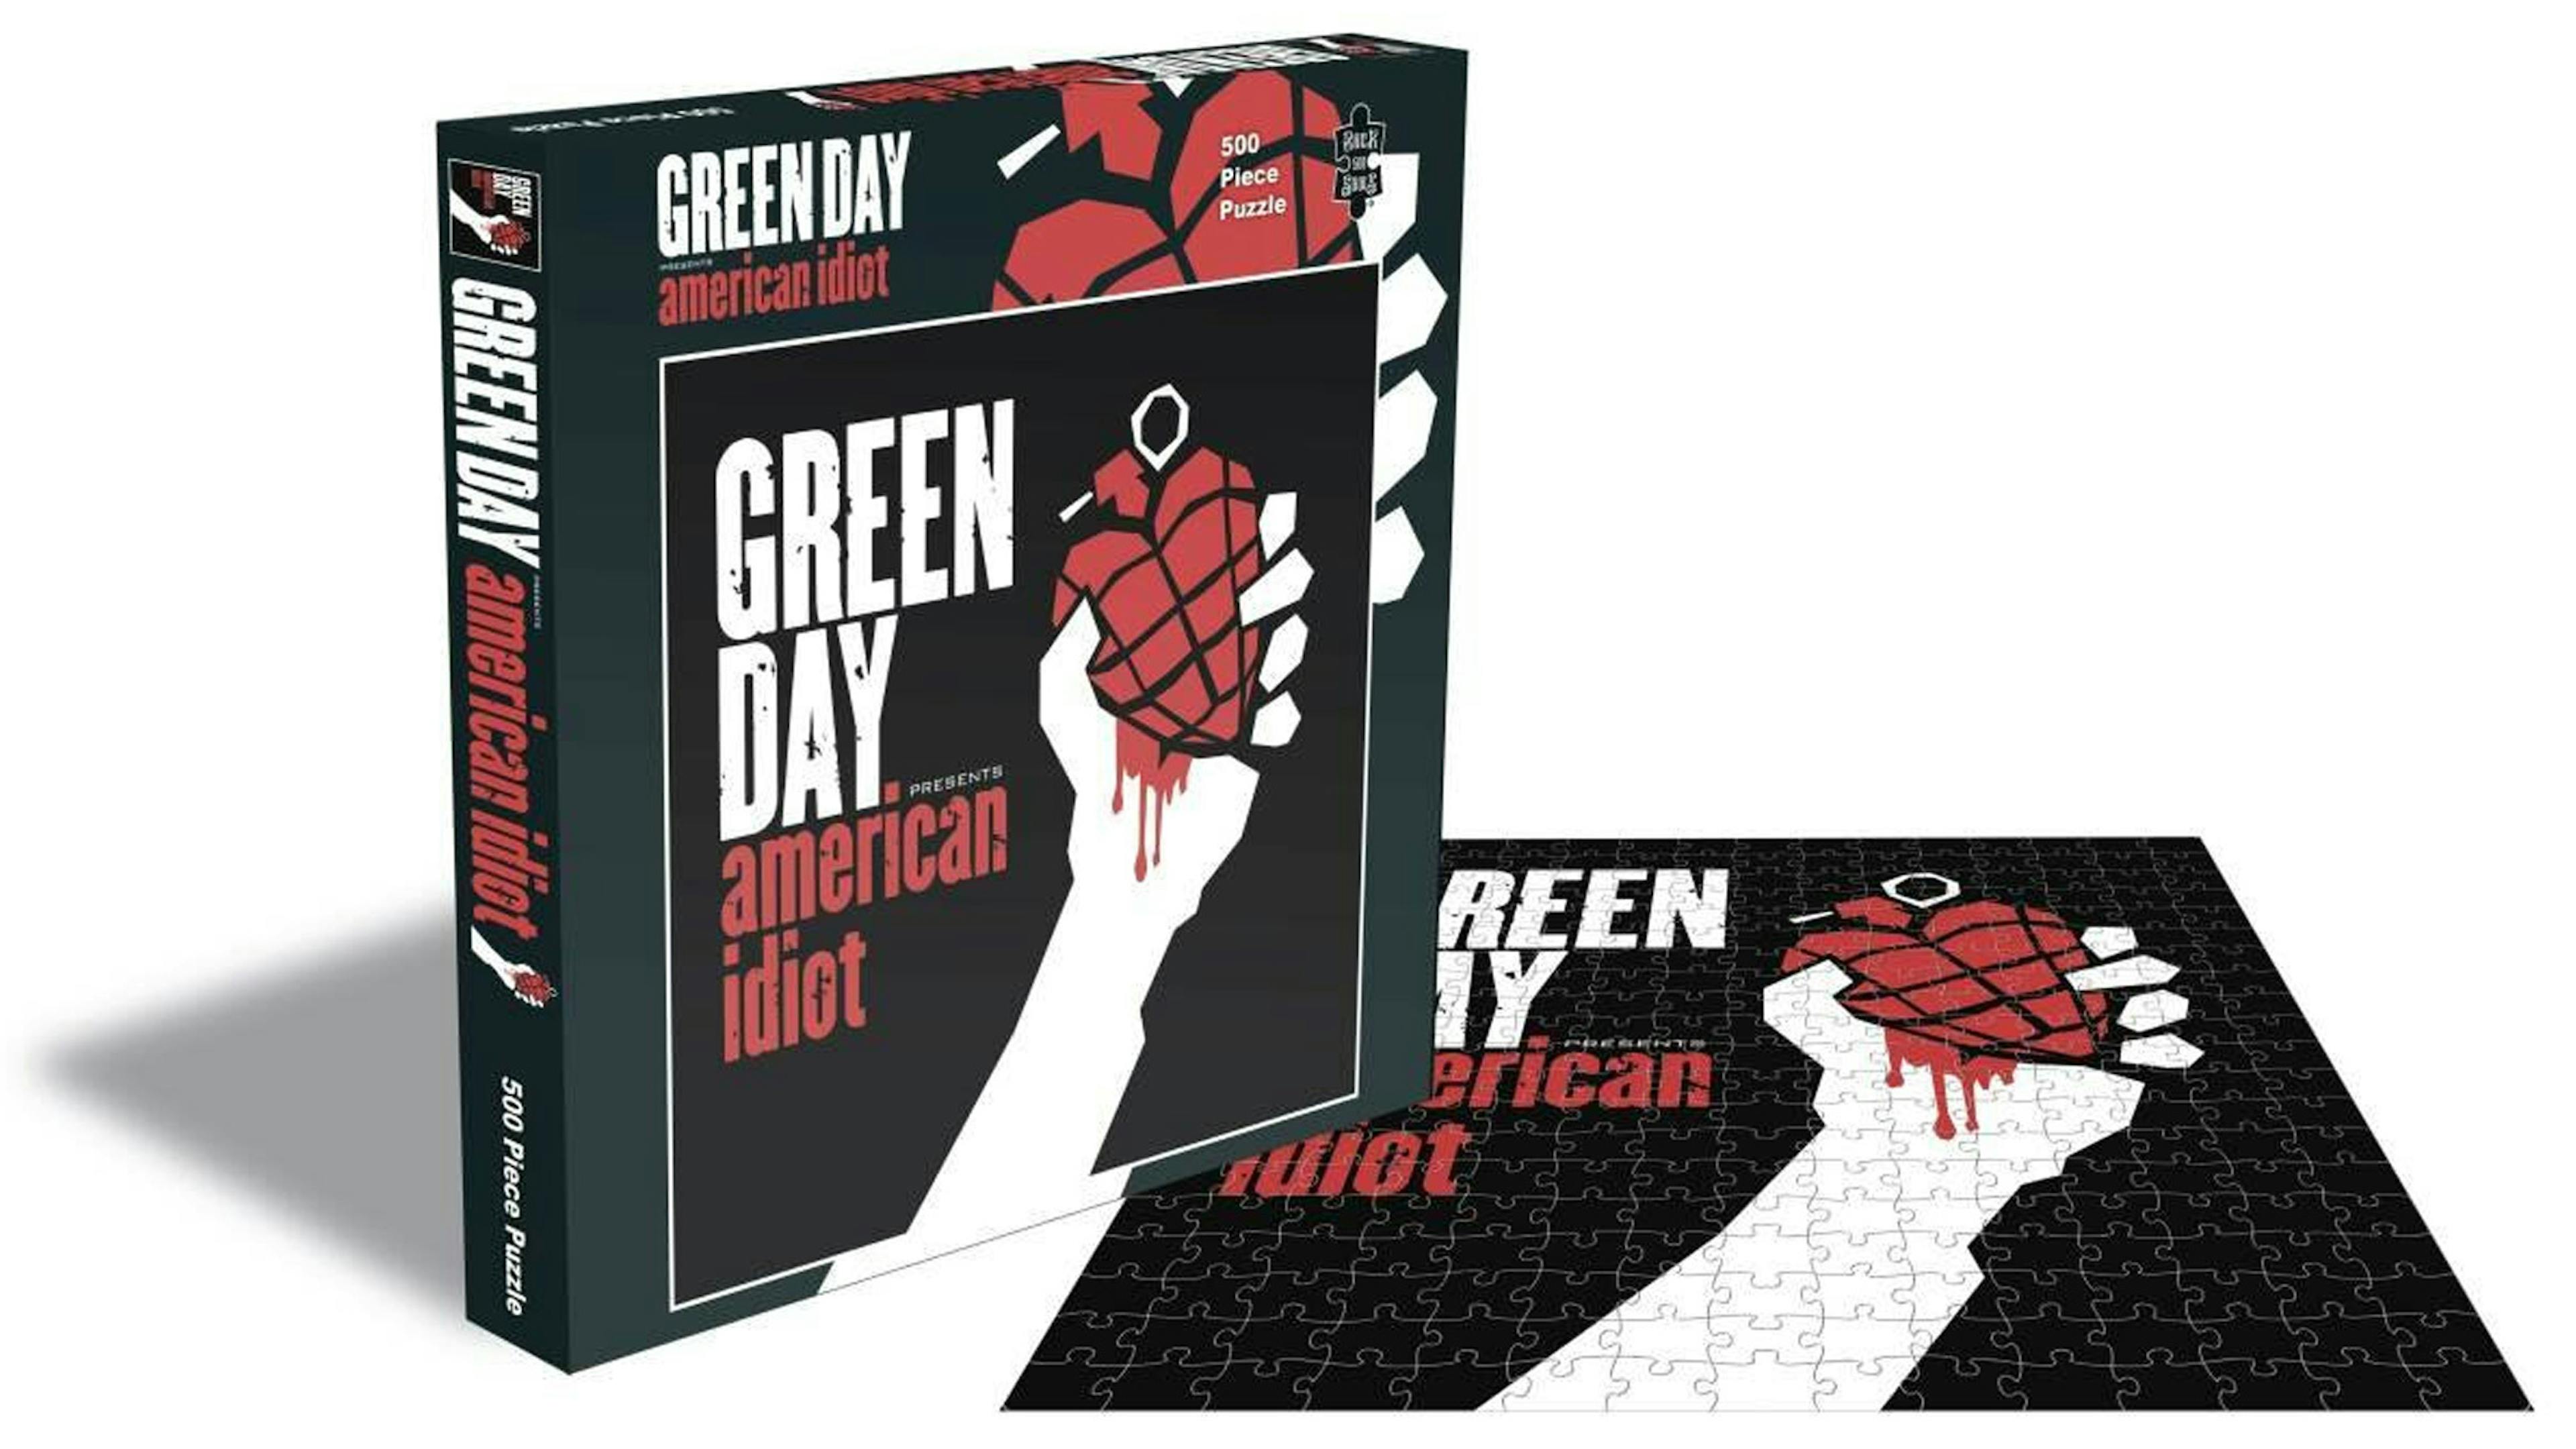 Green Day jigsaw puzzles are being released in April